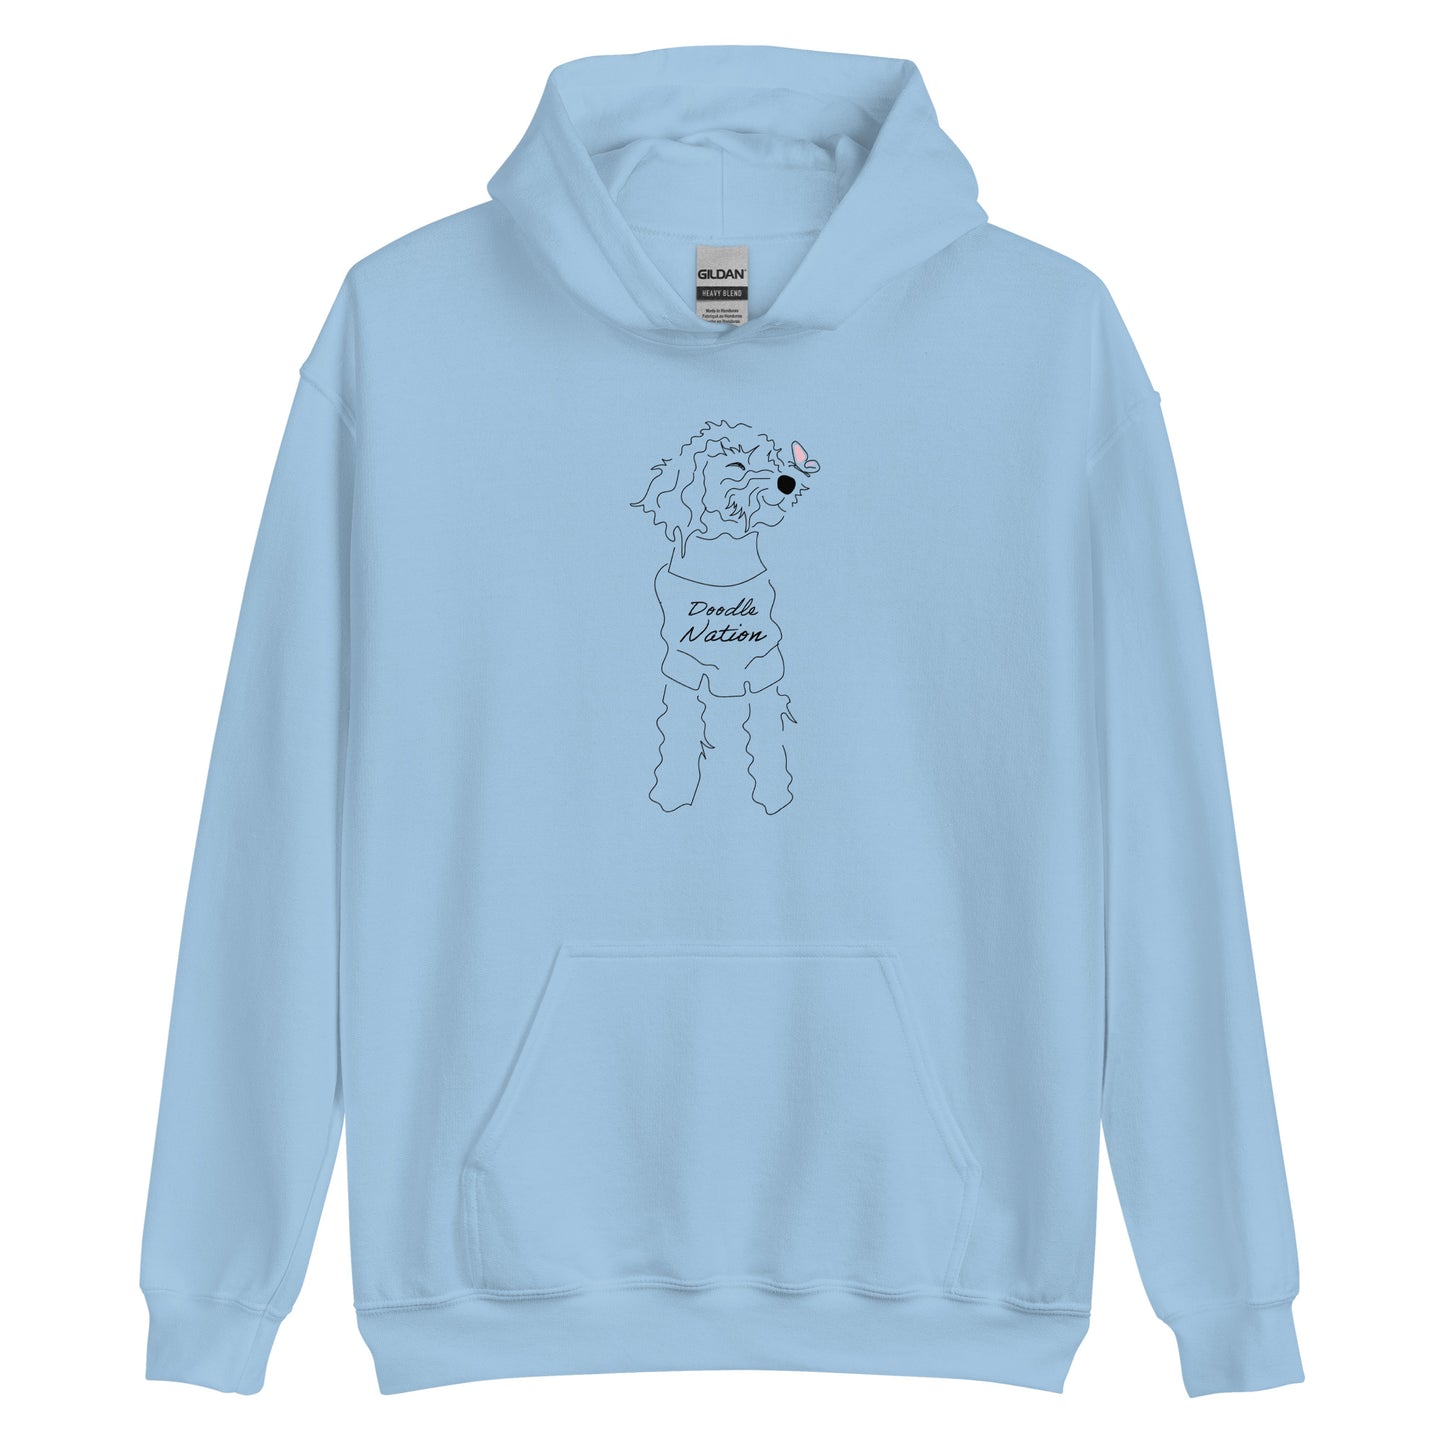 Goldendoodle hoodie with Goldendoodle dog face and words "Doodle Nation" in light blue color